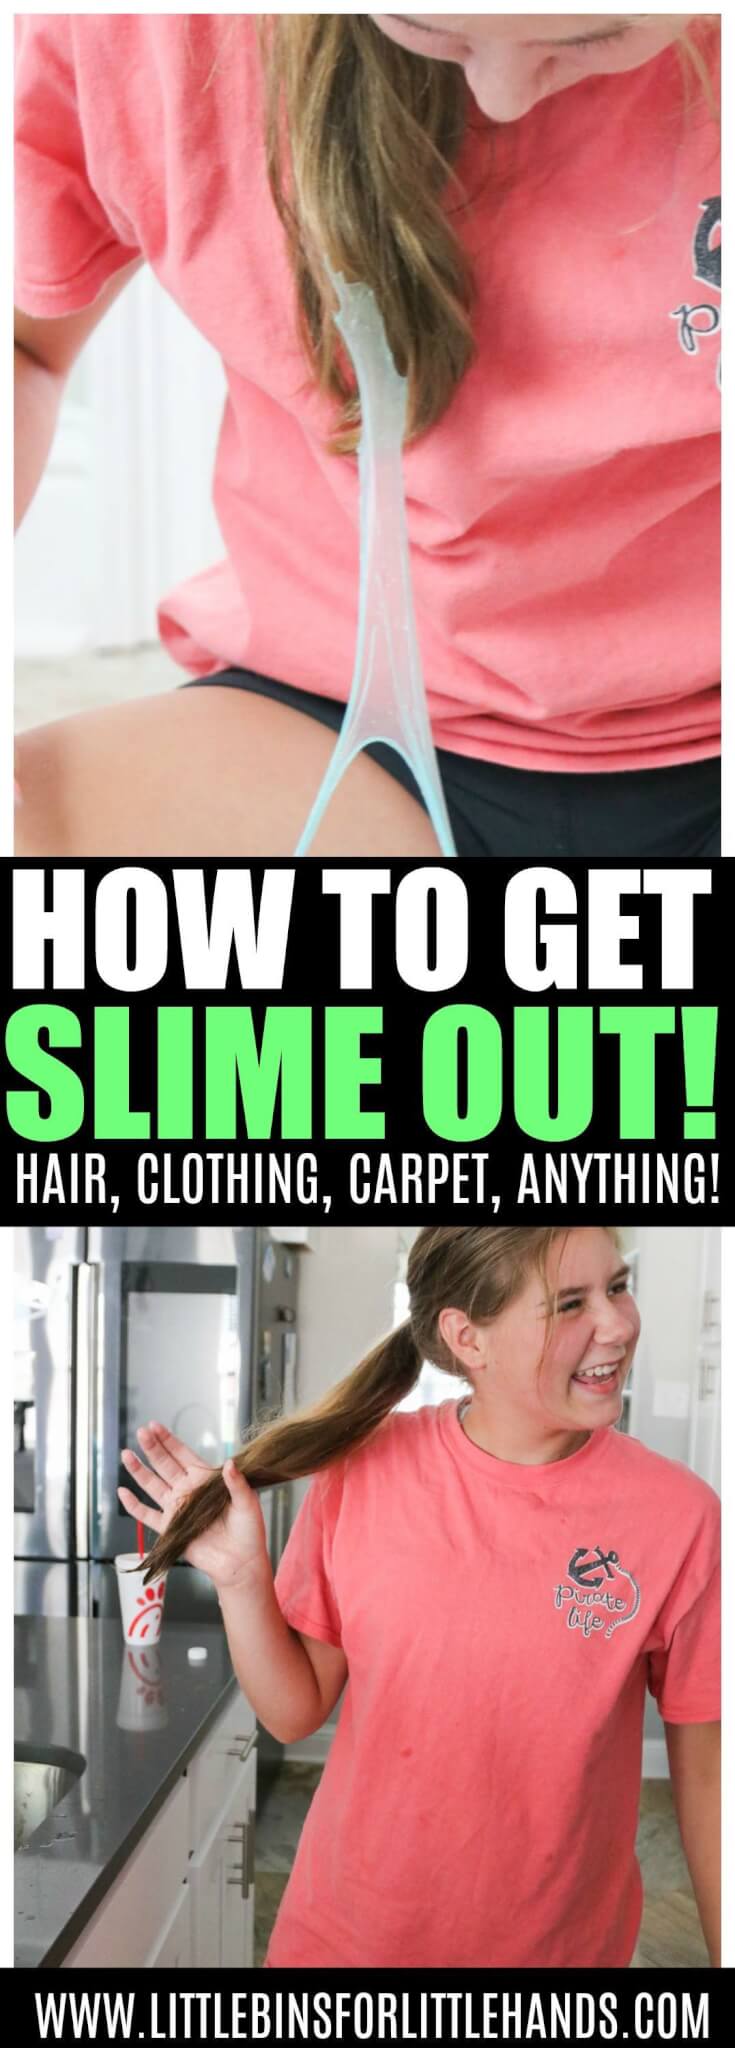 how to get slime out of clothing